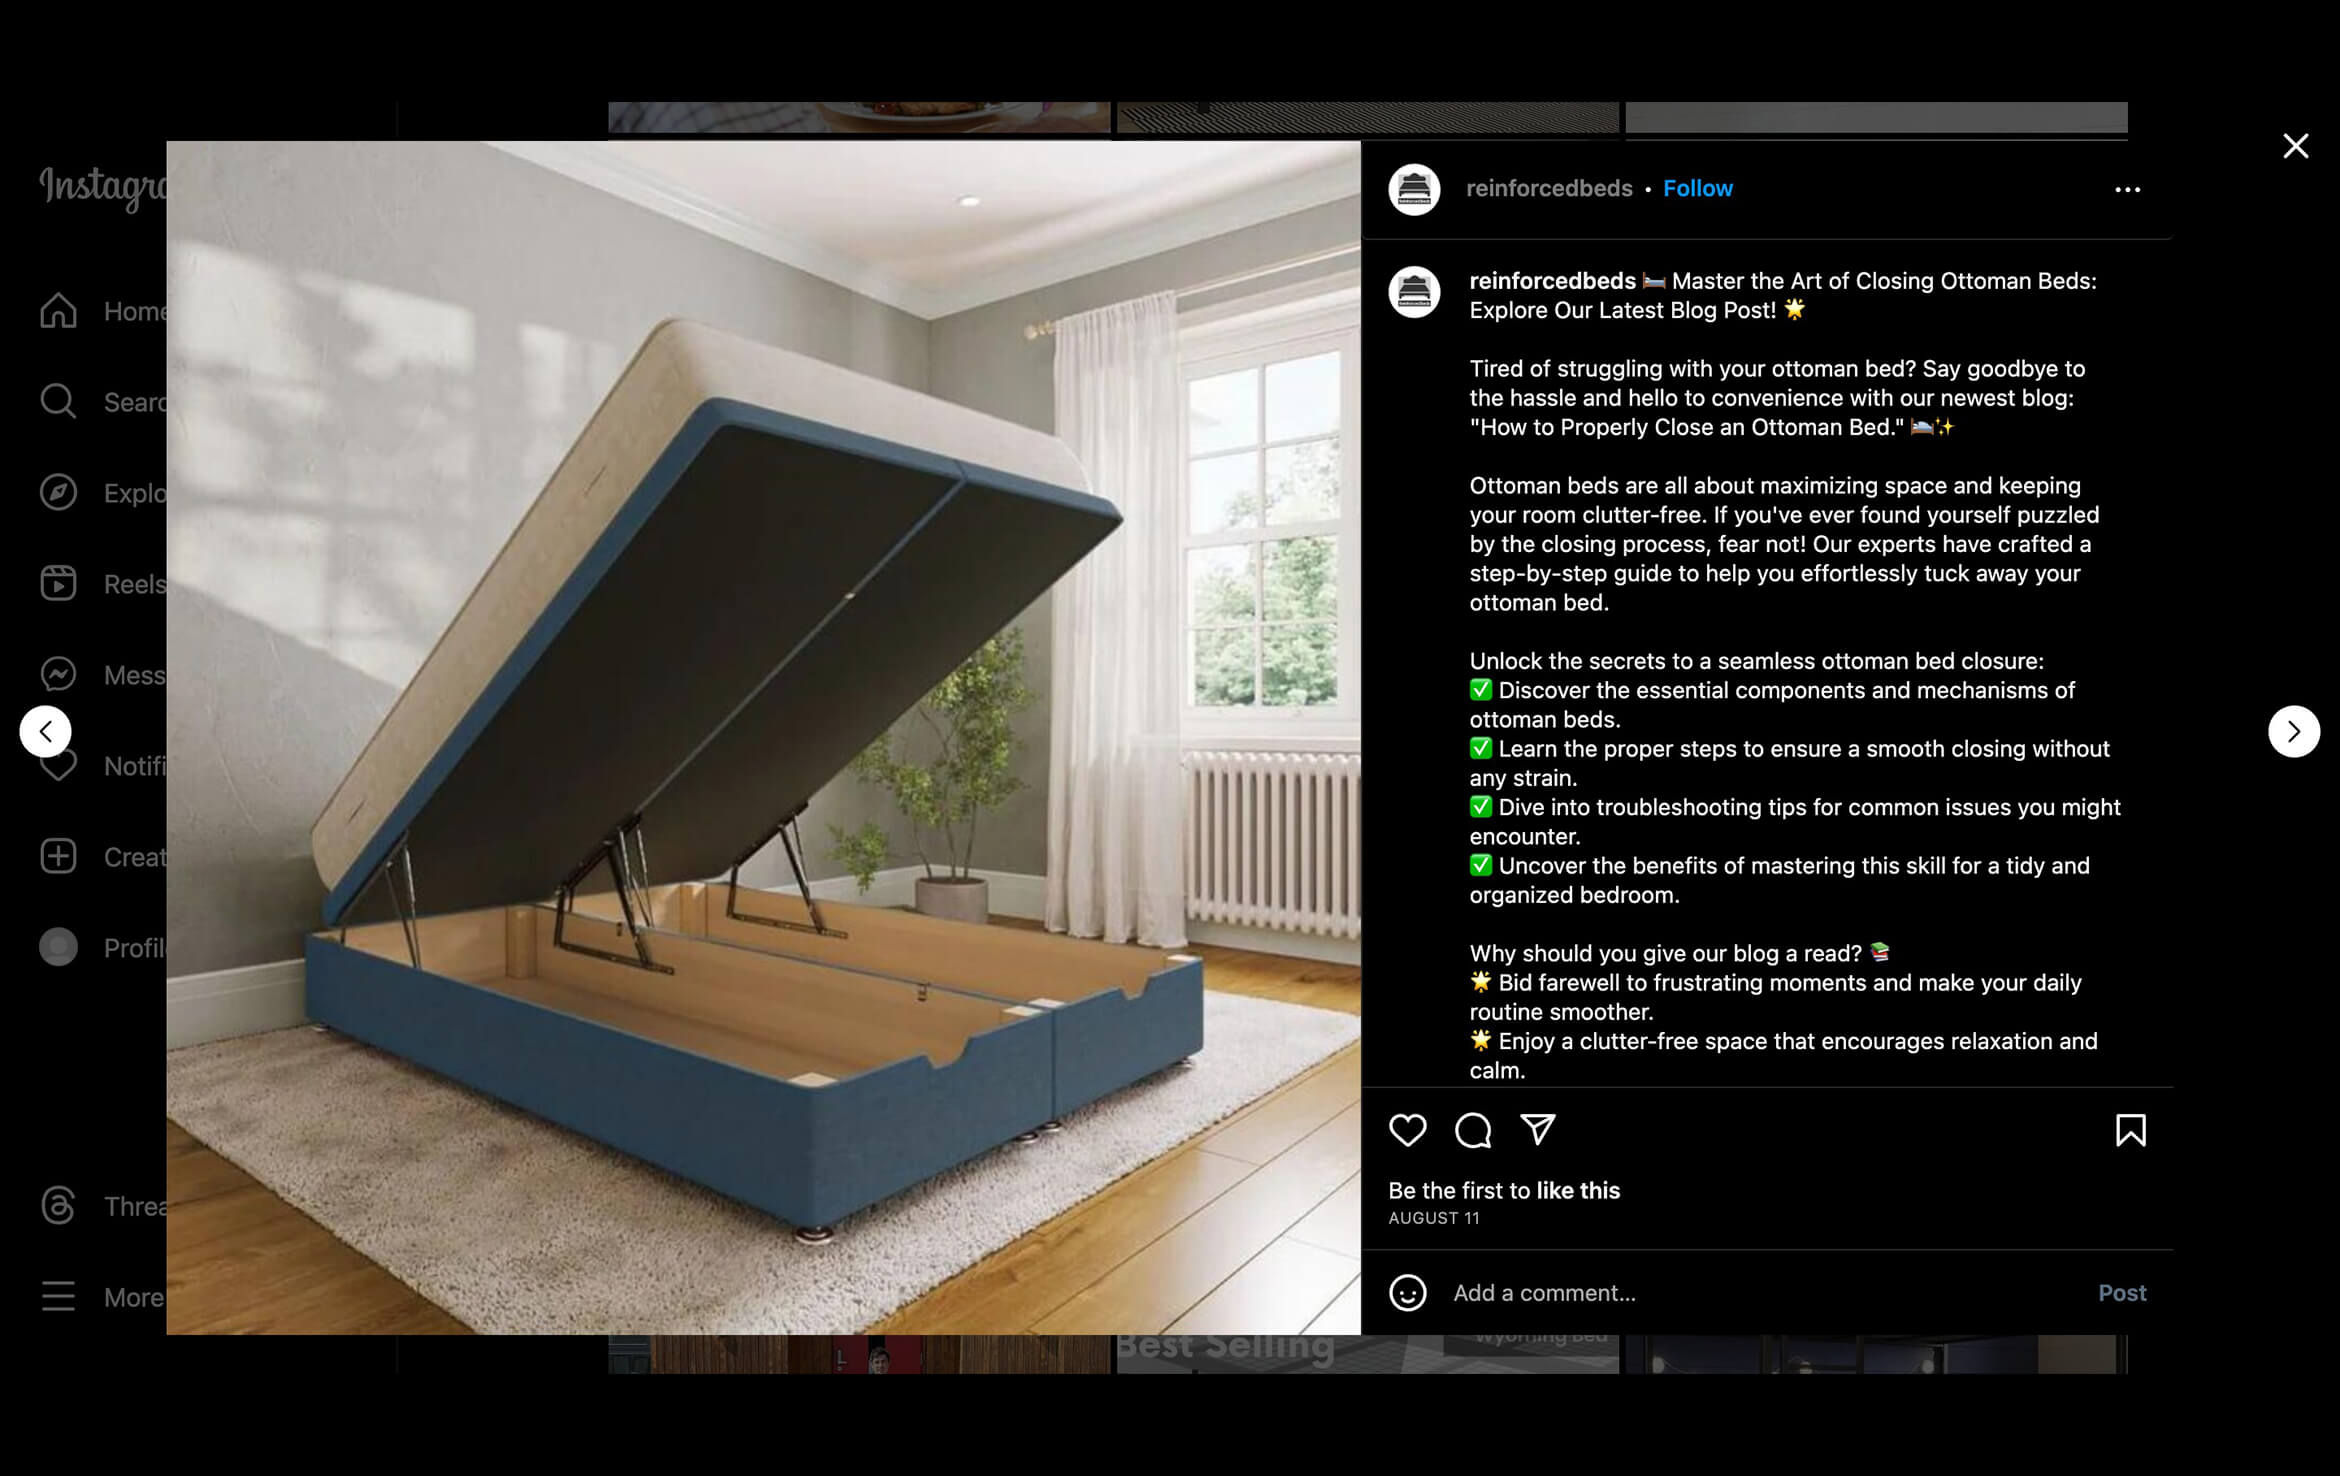 Product Rendering for Reinforced Beds Instagram